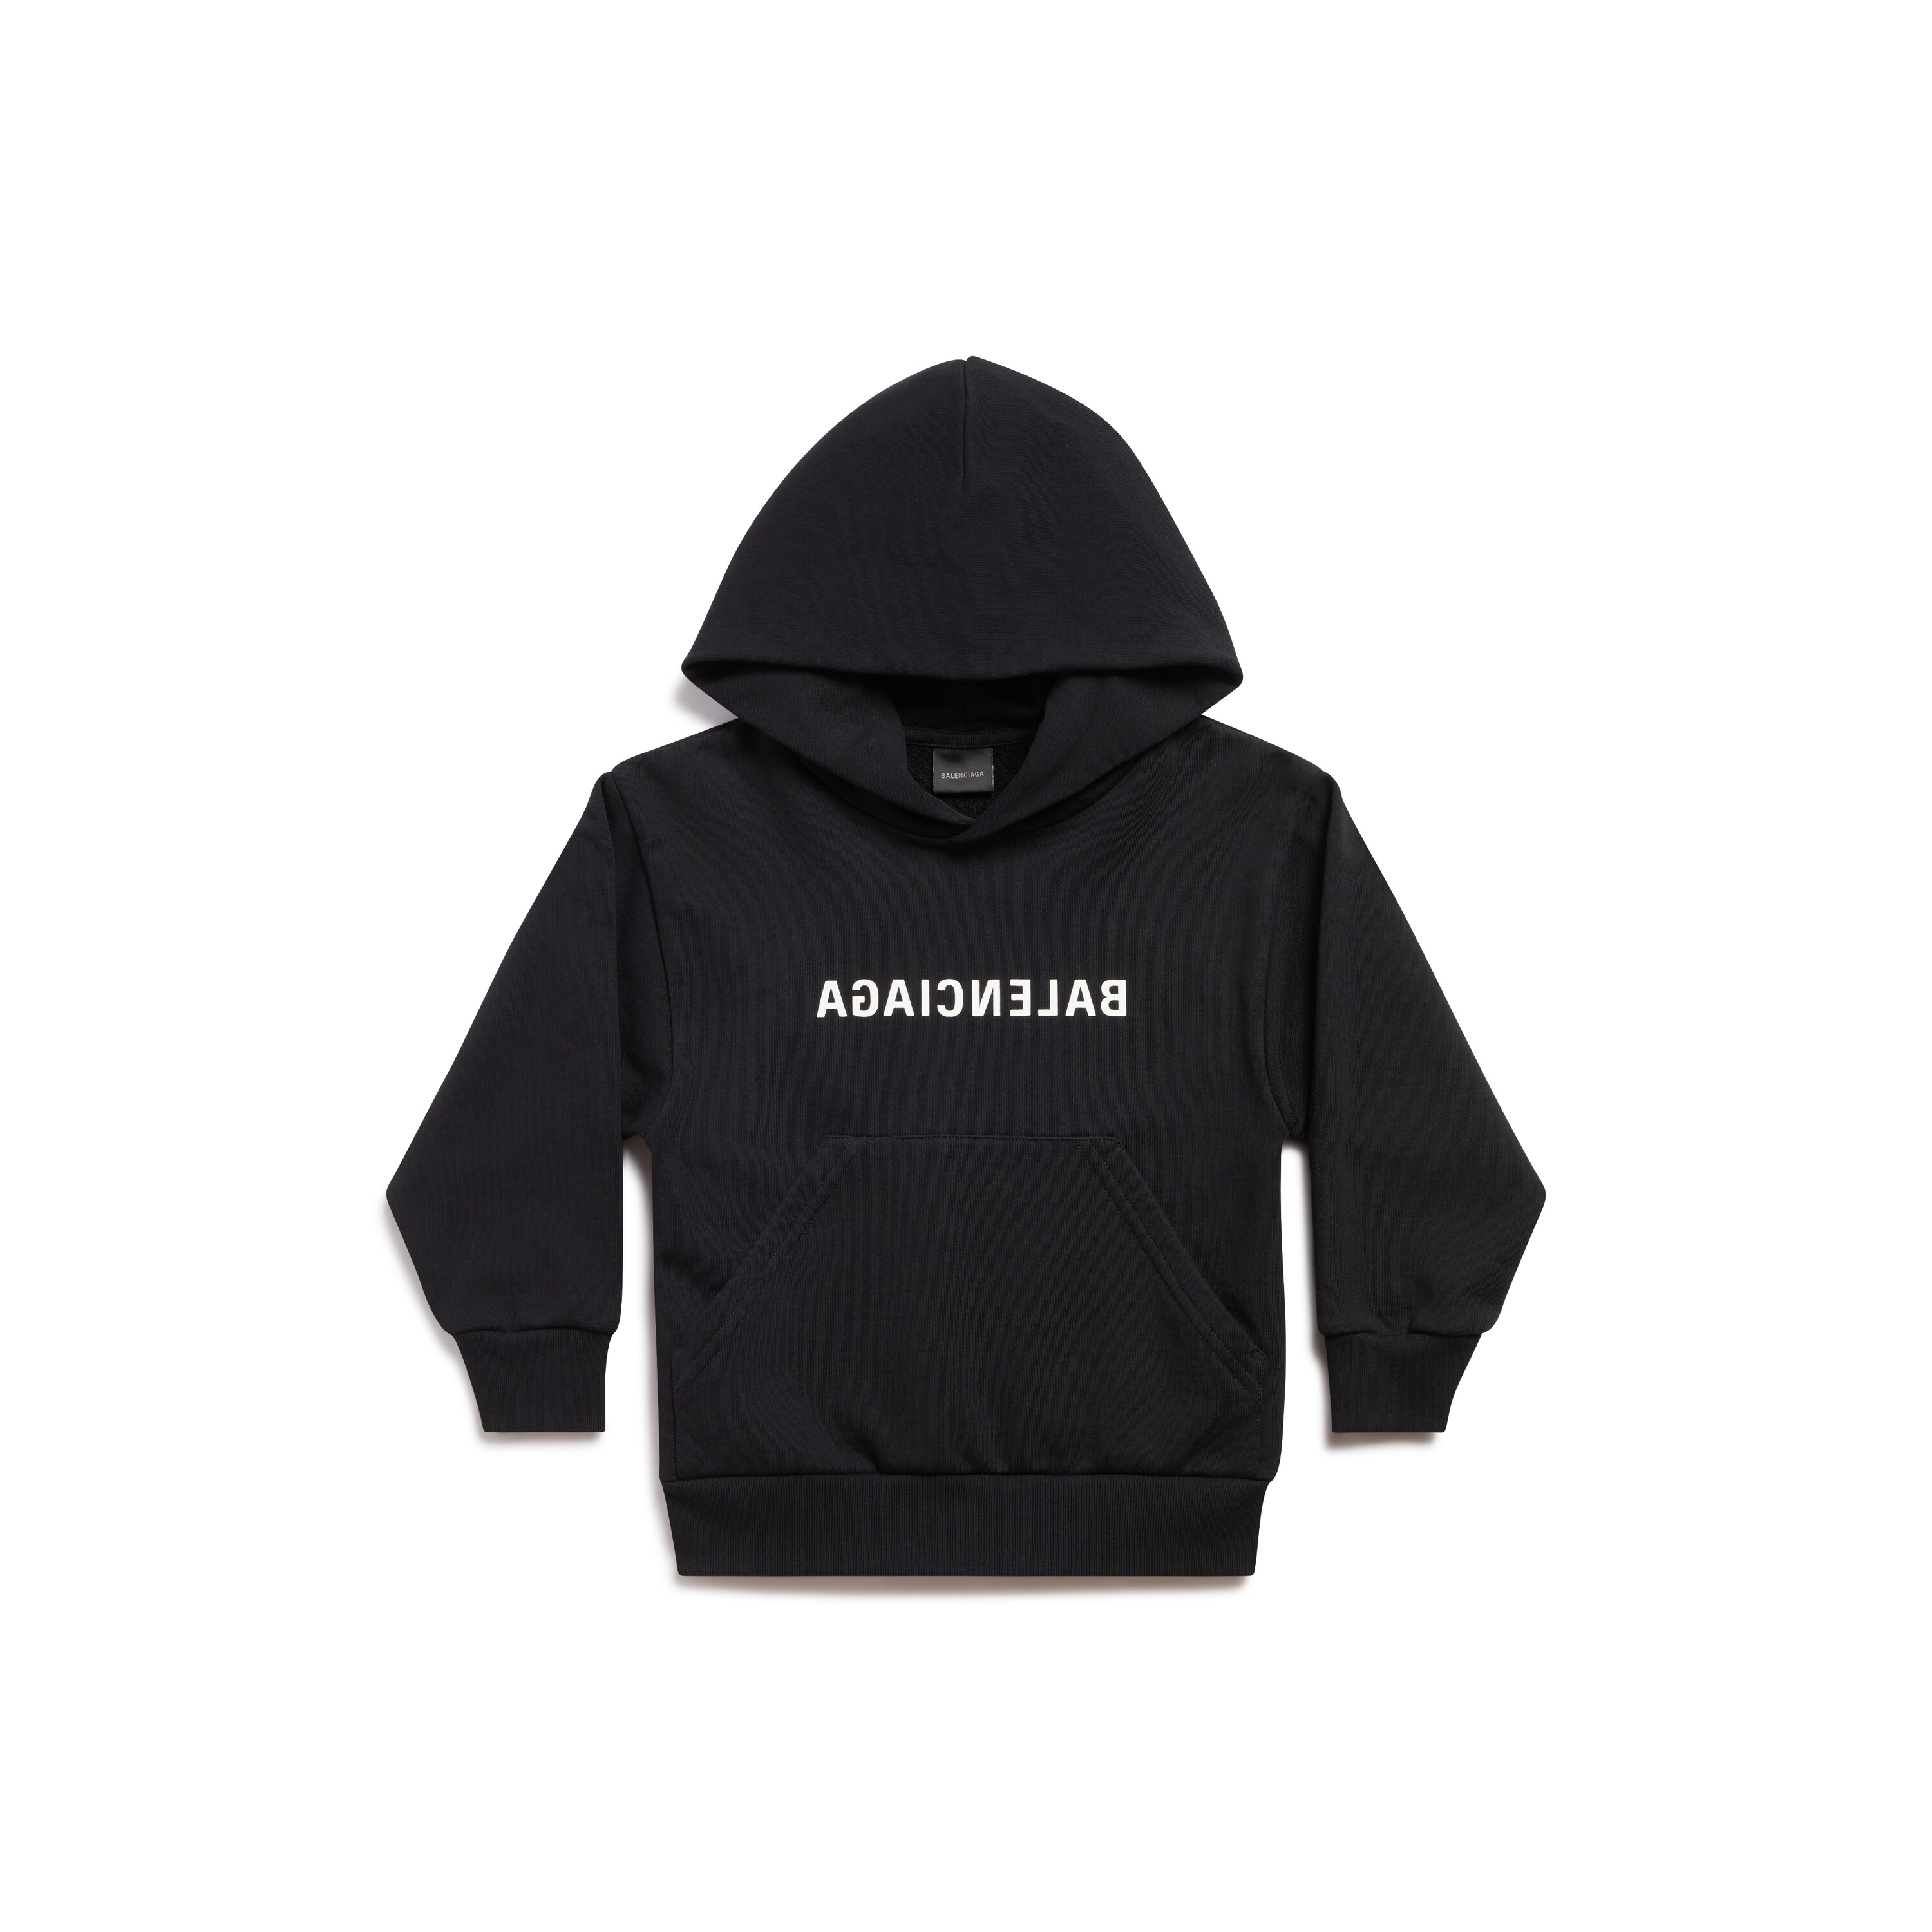 OffWhite Distressed Hoodie by Balenciaga on Sale